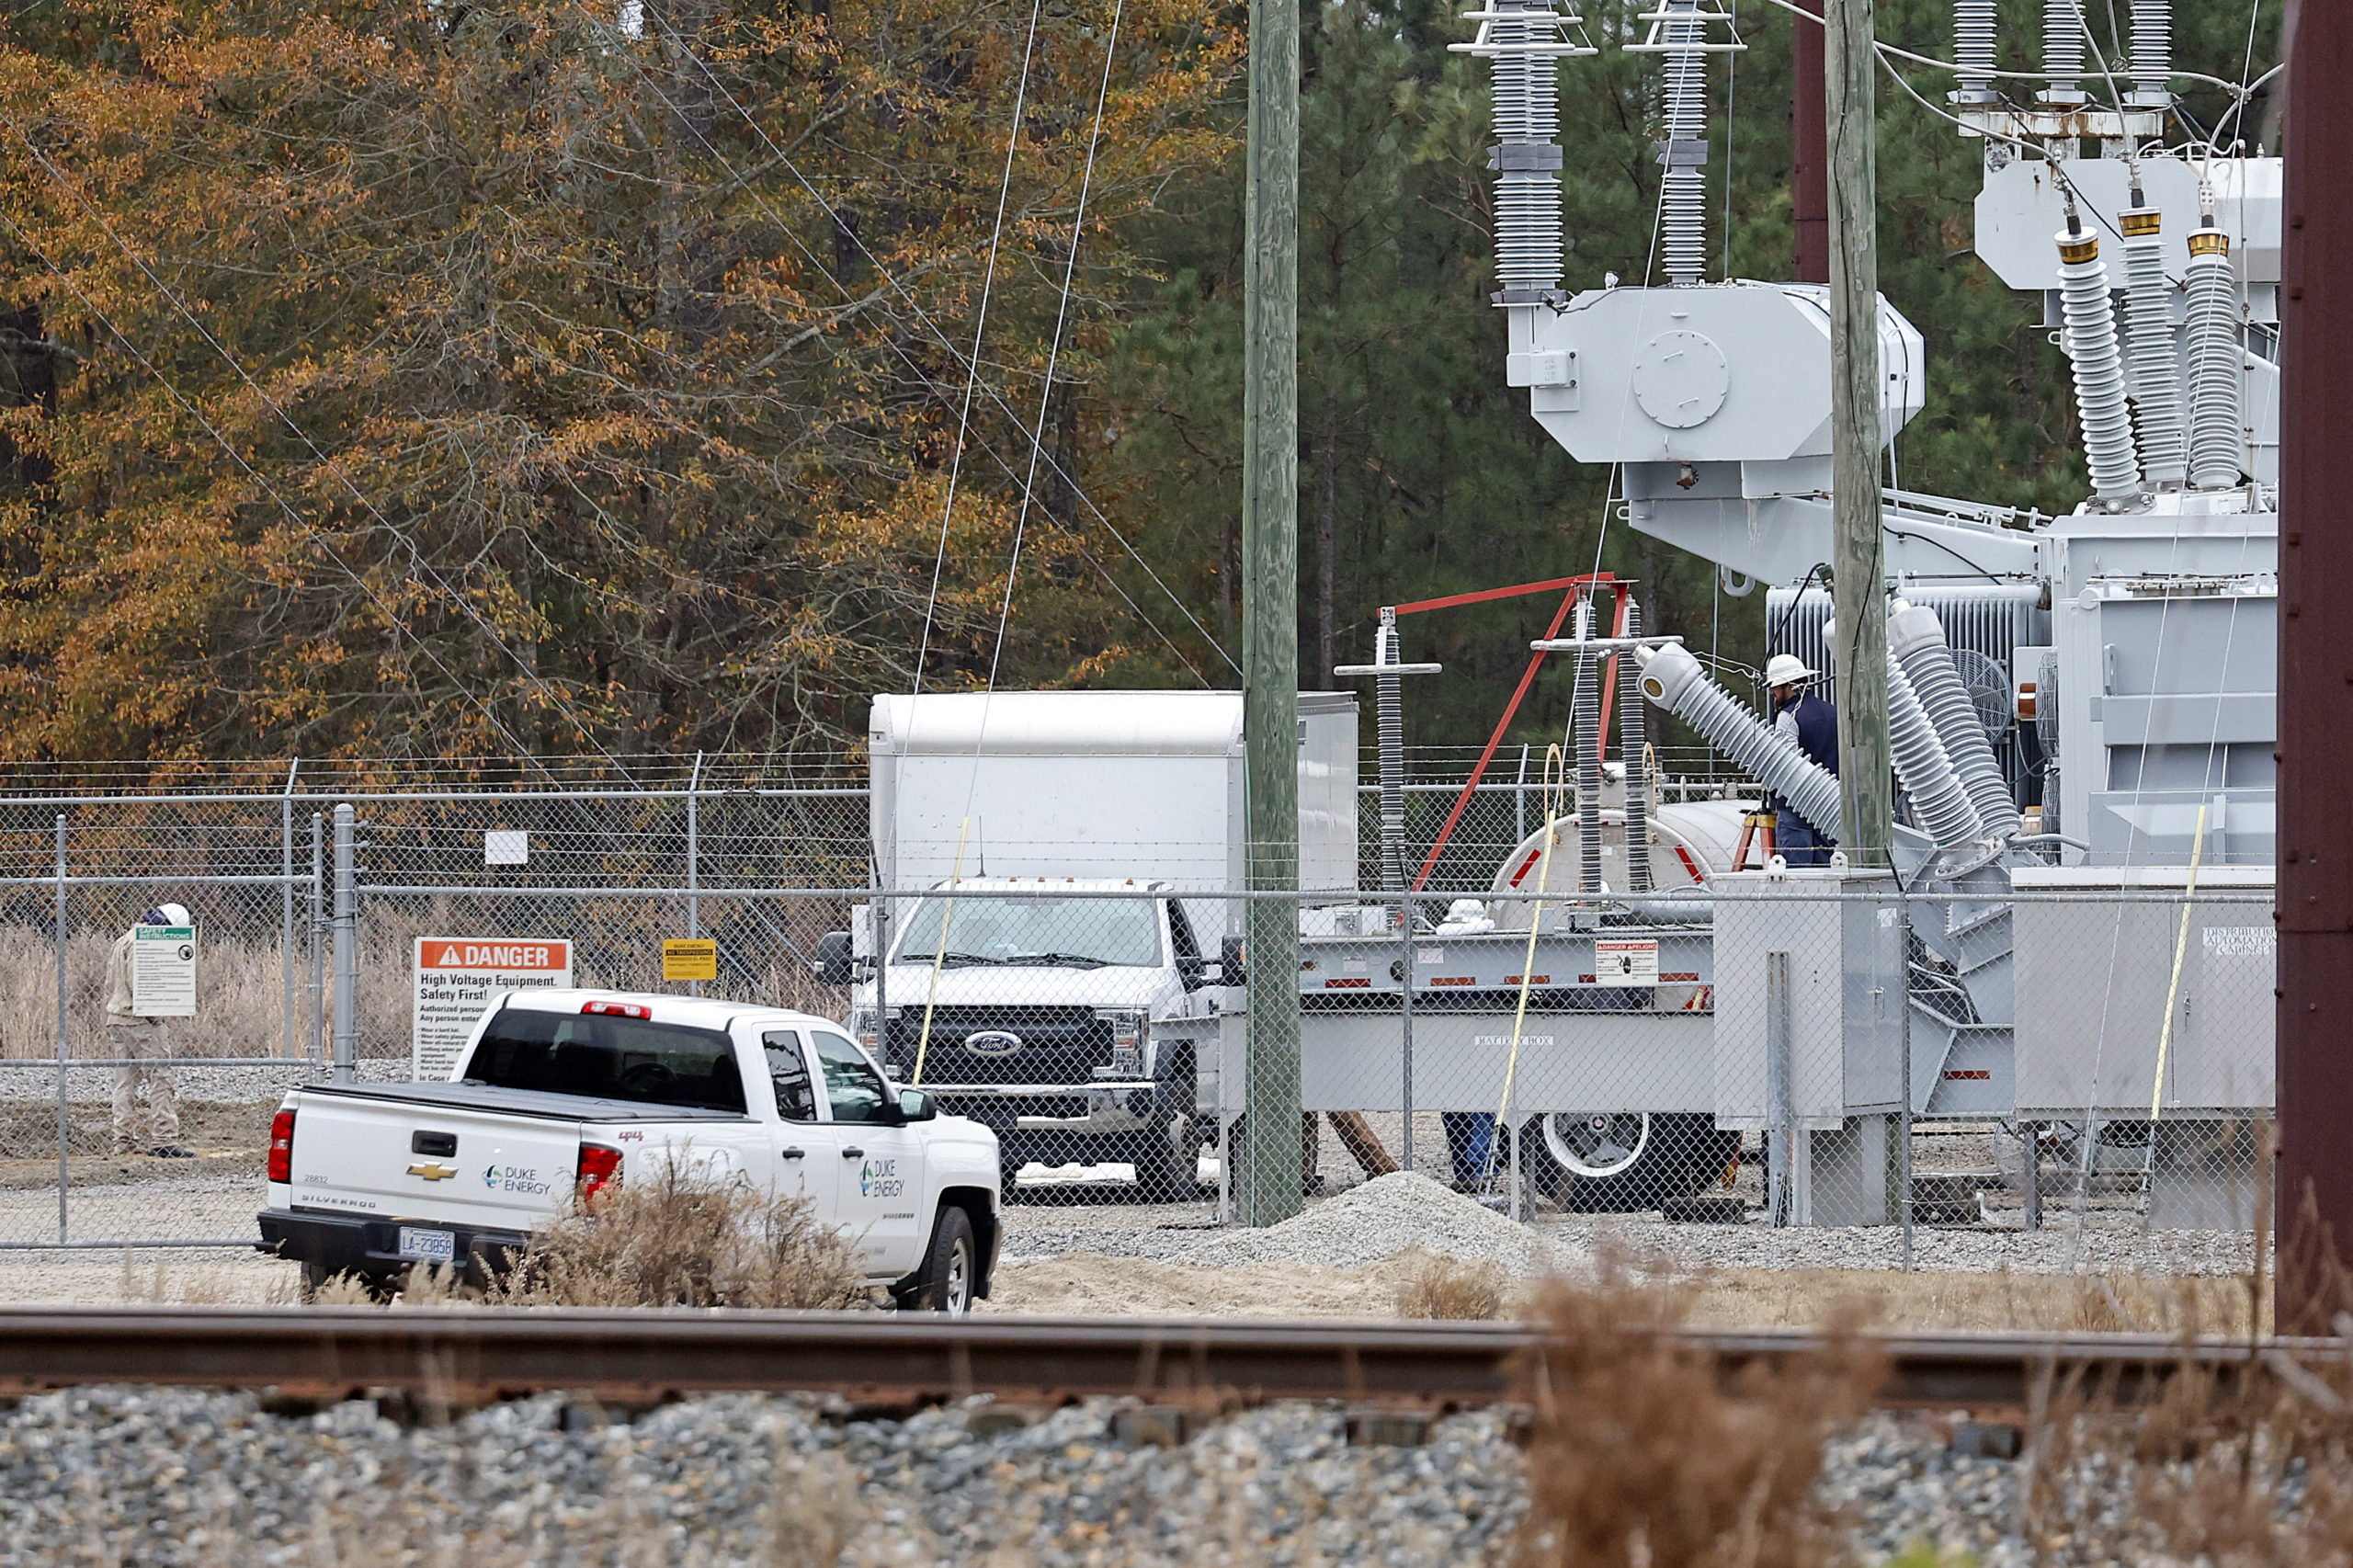 Workers work on equipment at the West End Substation in West End, North Carolina, on Dec. 5, 2022, where a serious attack on critical infrastructure caused a power outage to many around Southern Pines.